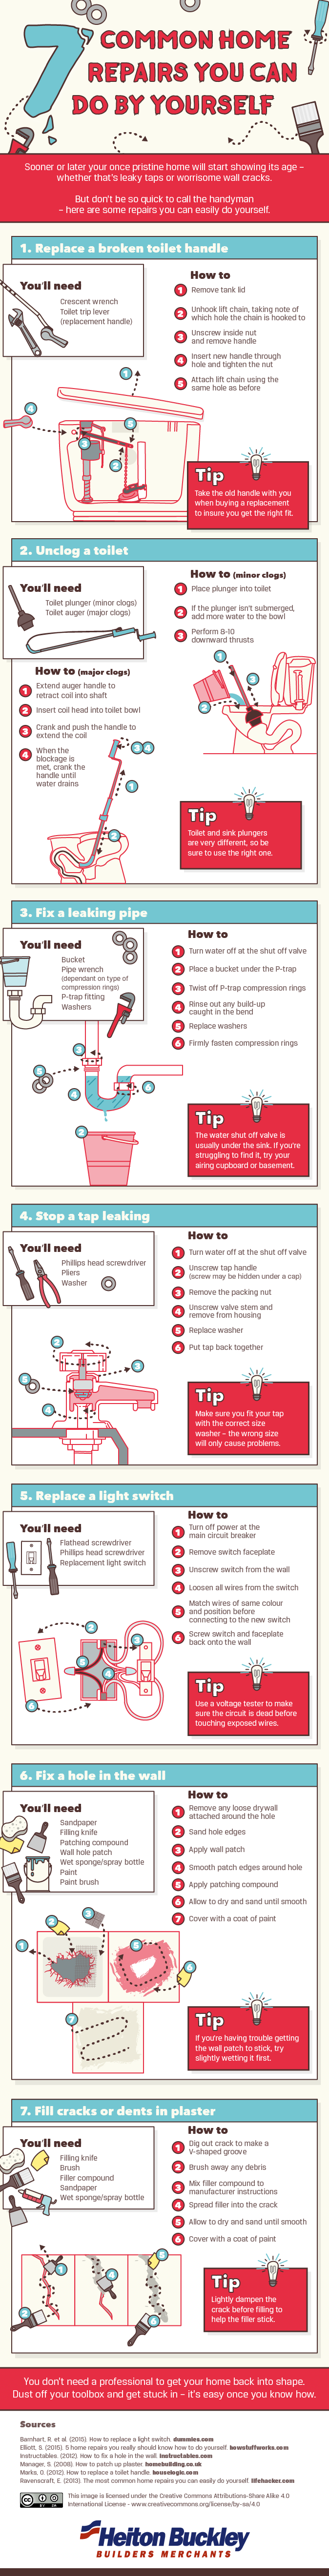 Common-home-repairs-you-can-do-yourself